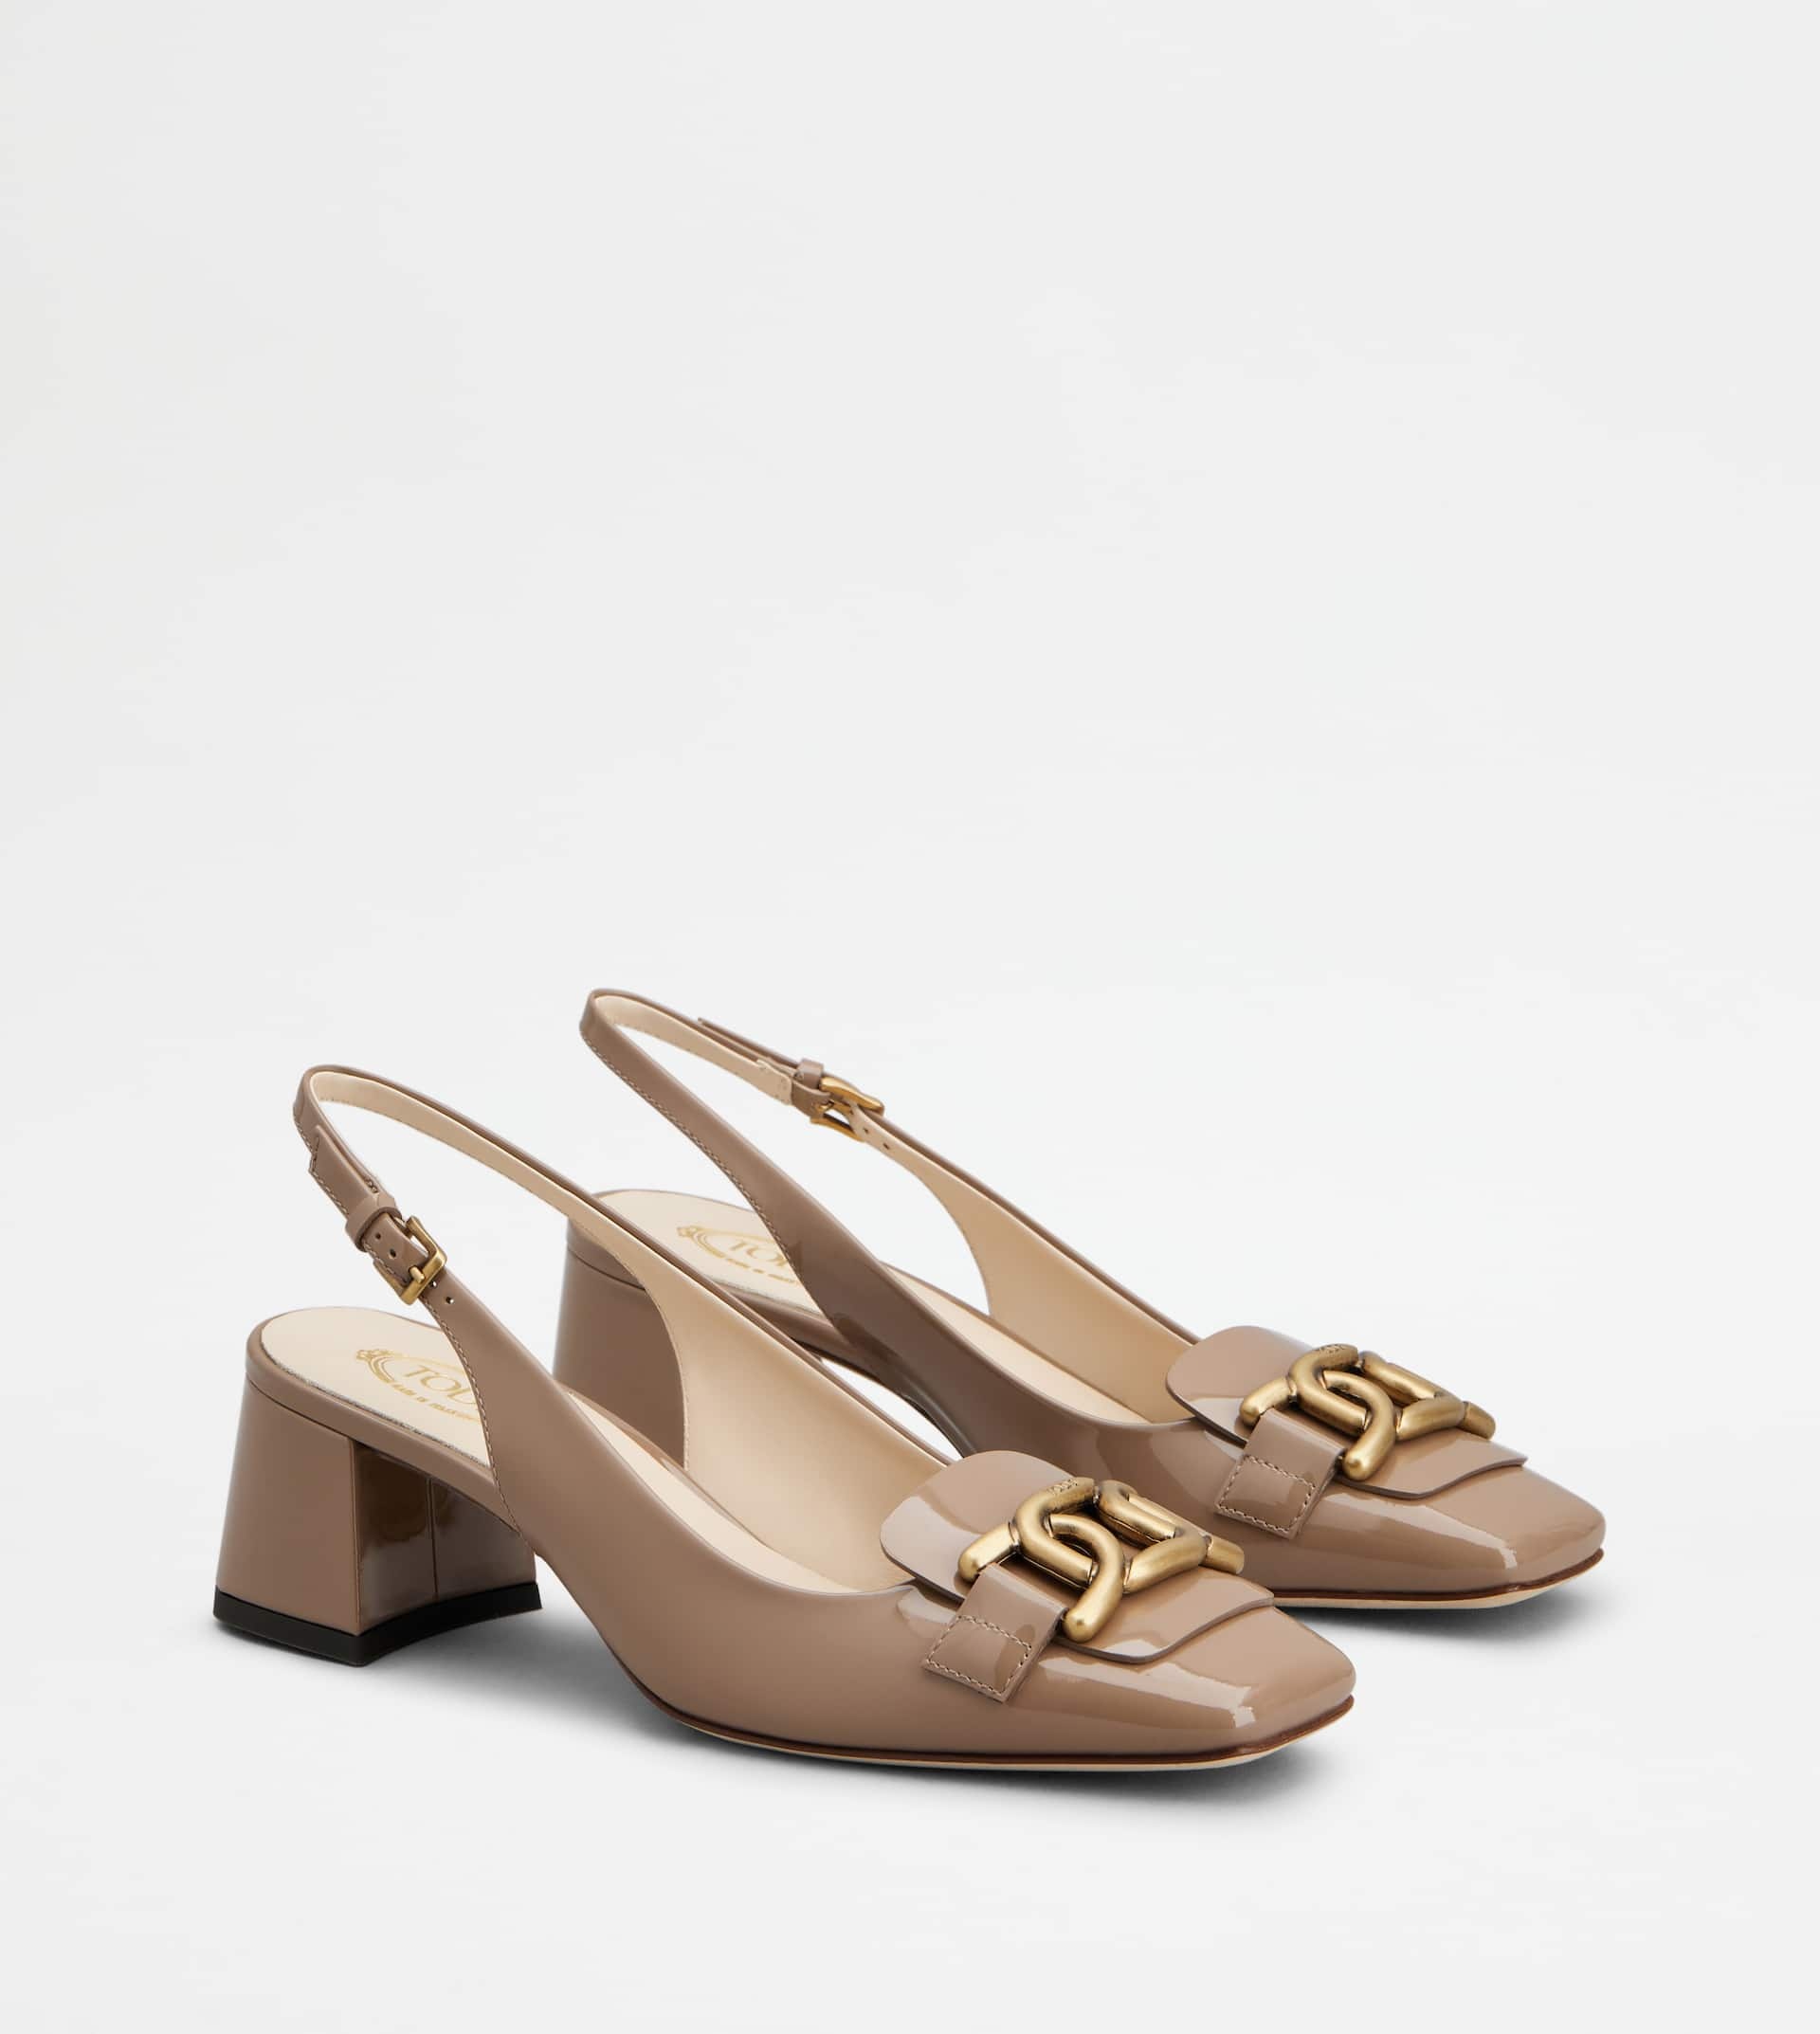 KATE SLINGBACK PUMPS IN PATENT LEATHER - BEIGE - 3